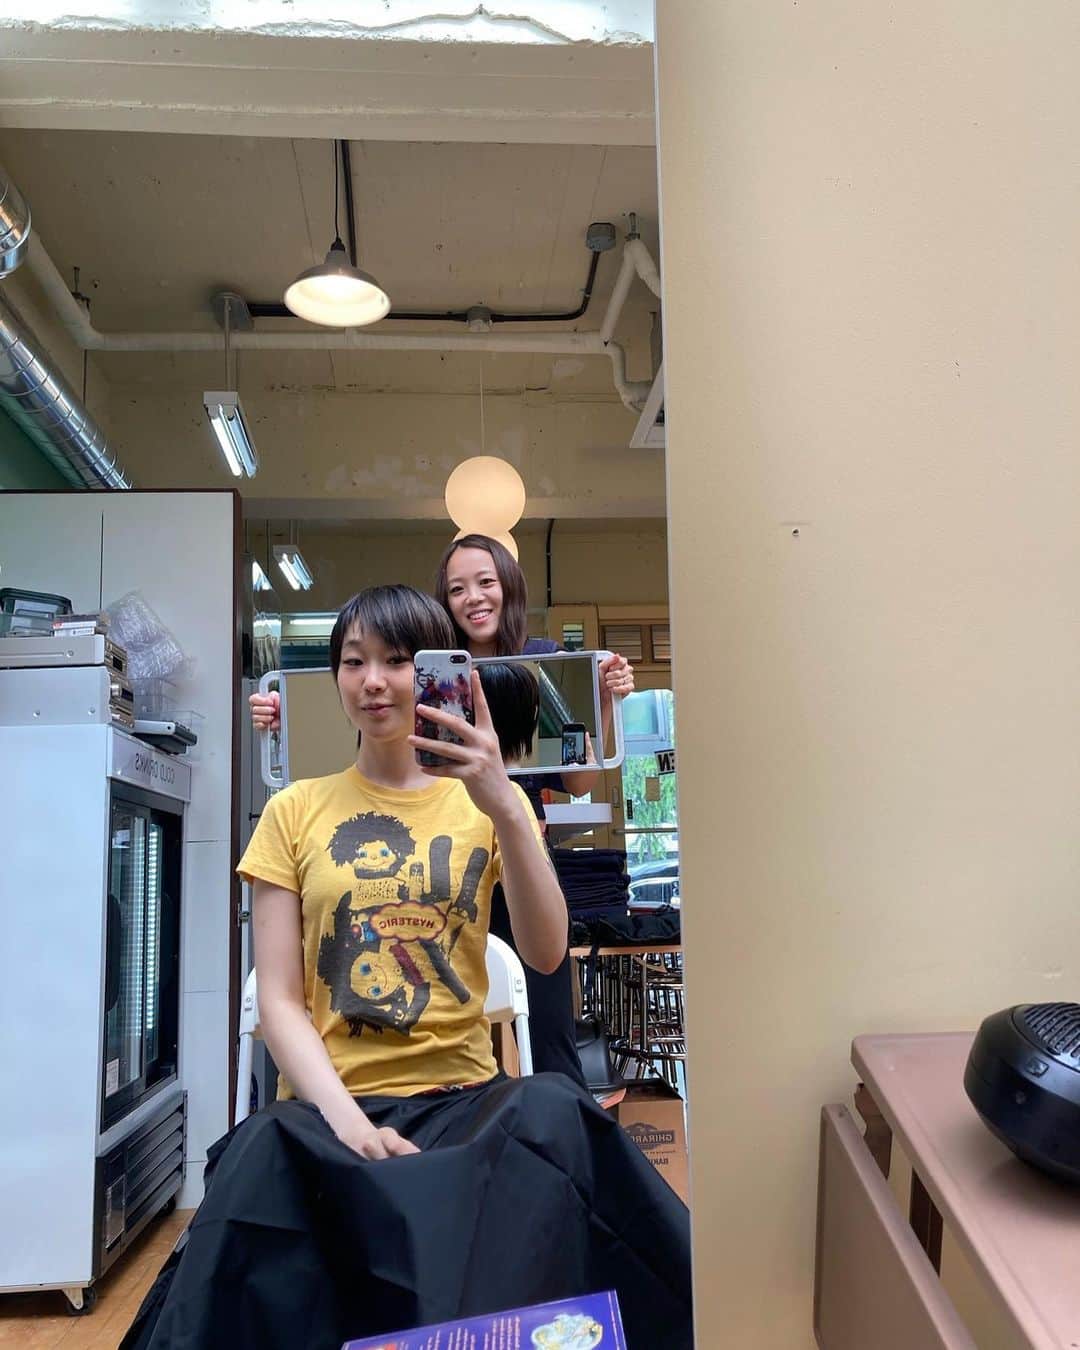 三浦さきえさんのインスタグラム写真 - (三浦さきえInstagram)「FLEURI hair cut popup in seoul🌼 me and @umeboooy @fleuri.jp  did popup for the first ever haircut in seoul.  It was only one day, but a lot of people came and it was a very happy and unforgettable time🥹🫶  @dragonhillprintshop @fuckyouiworkfortraitor @myokahara lent me a wonderful space, they kindly accepted me from the preliminary preparations, and they helped us a lot on the day.  When I announced the popup in Seoul, I was a little bit nervous, but I received a lot of reservations, and the customers were all really sweet.they makes me happy 🥹  Thank you so much for the wonderful time. I want to do it again soon🫶🫶🫶  ずっとやりたいと思っていたヘアカットポップアップ。言葉にできないくらい楽しくて、改めてこの仕事を選んでよかったなぁと。思えた時間でした🫧  なぜかあんまりイメージが上手くわかなくて形にしていなかったんだけど、今がタイミングかもっていきなり思い立って。本当にやってよかった。  お店をかしてくれたjaeもhyejin 本当に本当にナイスで 来てくれたお客様も全員素敵な方達で、どこにいっても素敵な人たちに巡り会えること。 本当に恵まれているなと改めて感じさせられたし、自分がする仕事をこんなに求めてくれて喜んでくれる人が世界中にいることを感じて、原点回帰ができました。  私はFLEURIをつくったけど、 今ではFLEURIとゆう存在がみんなからの愛をもらって、私を支えてくれていると感じさせられた時間でした。  またここから頑張って、みんなにもらった愛をちゃんと返していけるようにします🥺🫶 大好きです💖💖💖 本当にありがとうございました！  @umeboooy いつも一緒にFLEURIを支えてくれて、戦ってくれてありがとう💖  世界中でpopupしたいっ🫧🫧  한국에서 많은 멋진 사람들을 만나서 헤어컷을 기뻐해주셔서 행복했습니다. 고마워요. 사랑 해요. 또 곧 만날 수 있는 것을 즐겁게 하고 있습니다💗💗💗💗💗」8月26日 22時52分 - sakiemiura